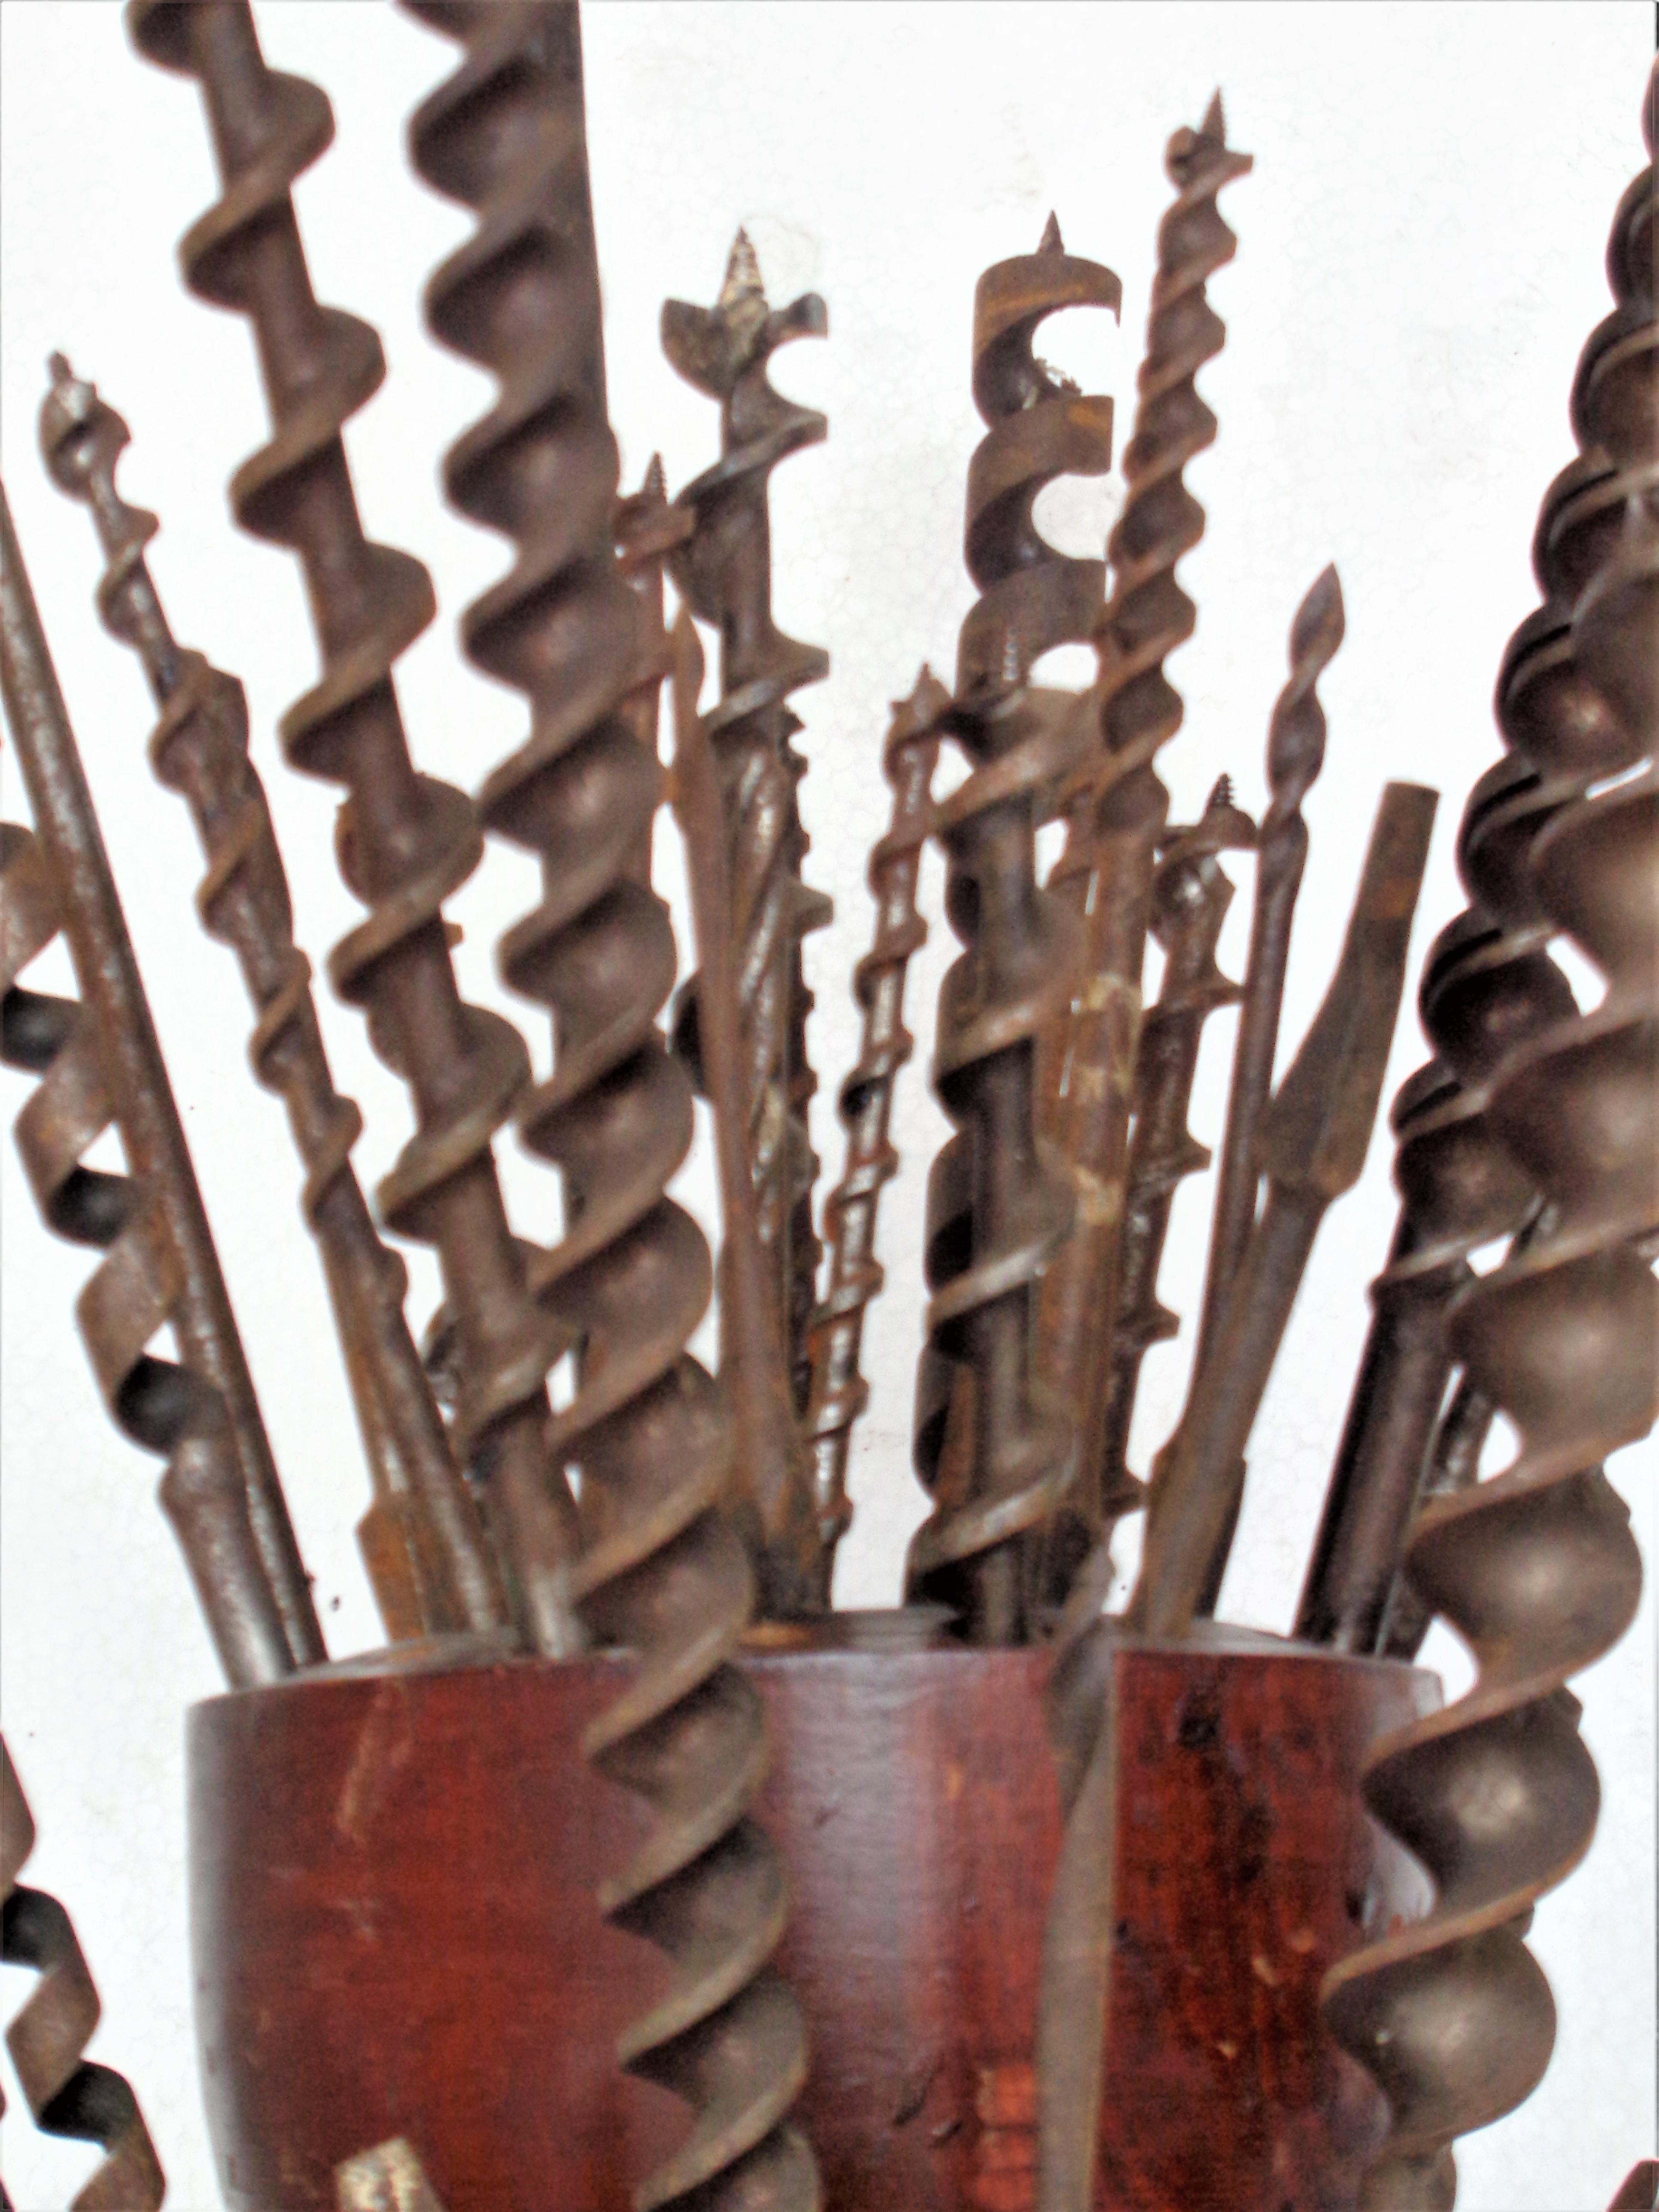 American Antique Drill Bit Holder & Drill Bits, As Found Industrial Sculpture For Sale